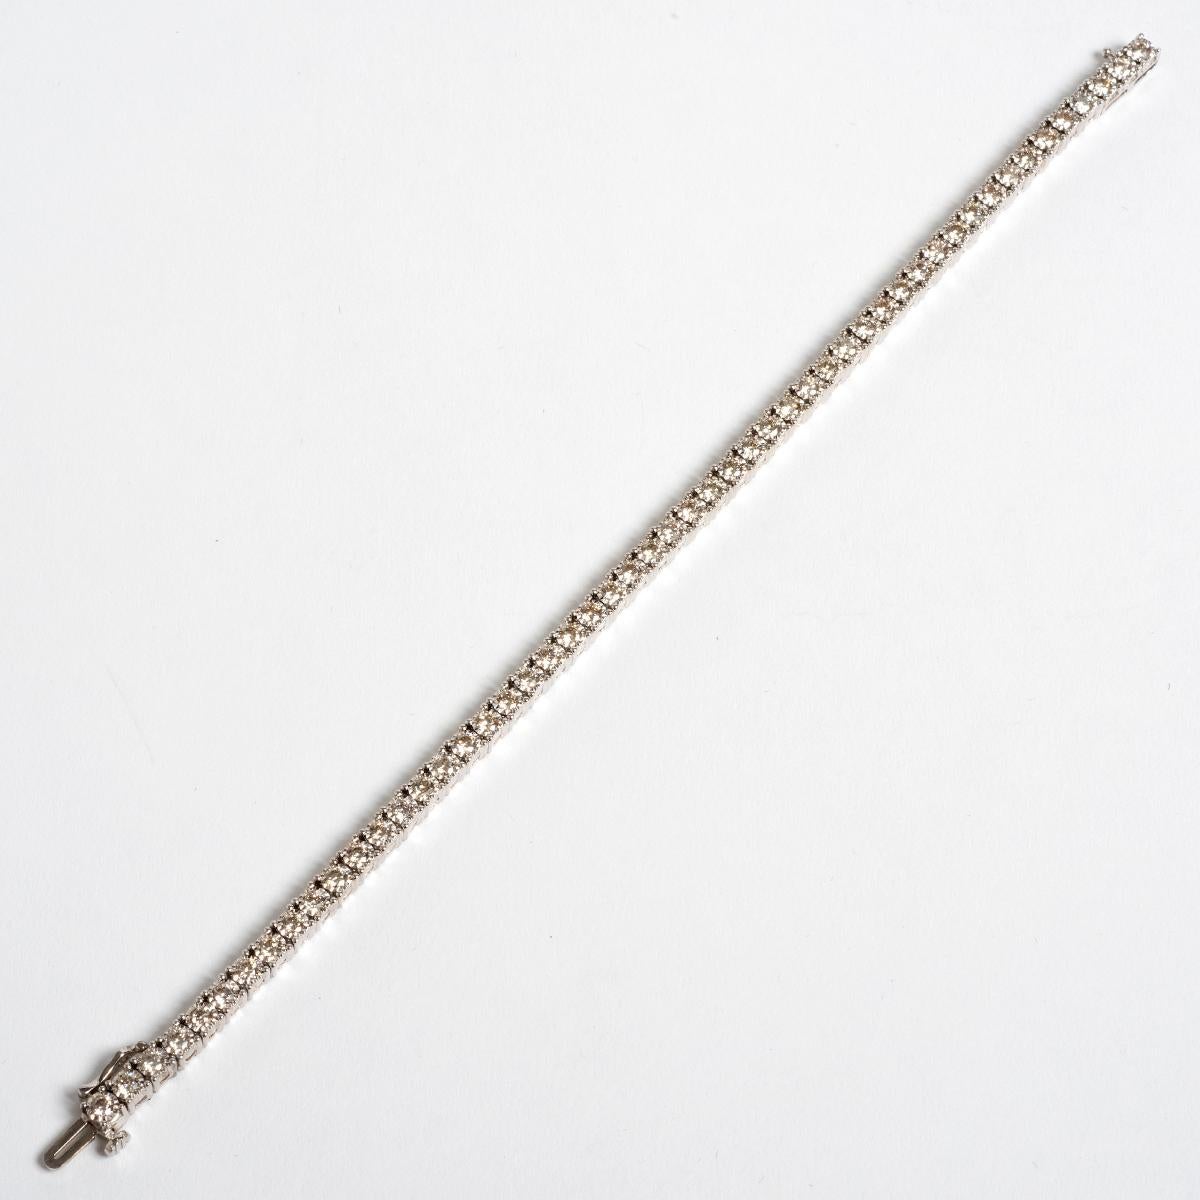 A unique piece within our carefully curated Vintage & Prestige fine jewellery collection, we are delighted to present the following:

This elegant diamond line bracelet is set in 9ct white gold. Diamond weight approx 3.50ct and measures 190mm.